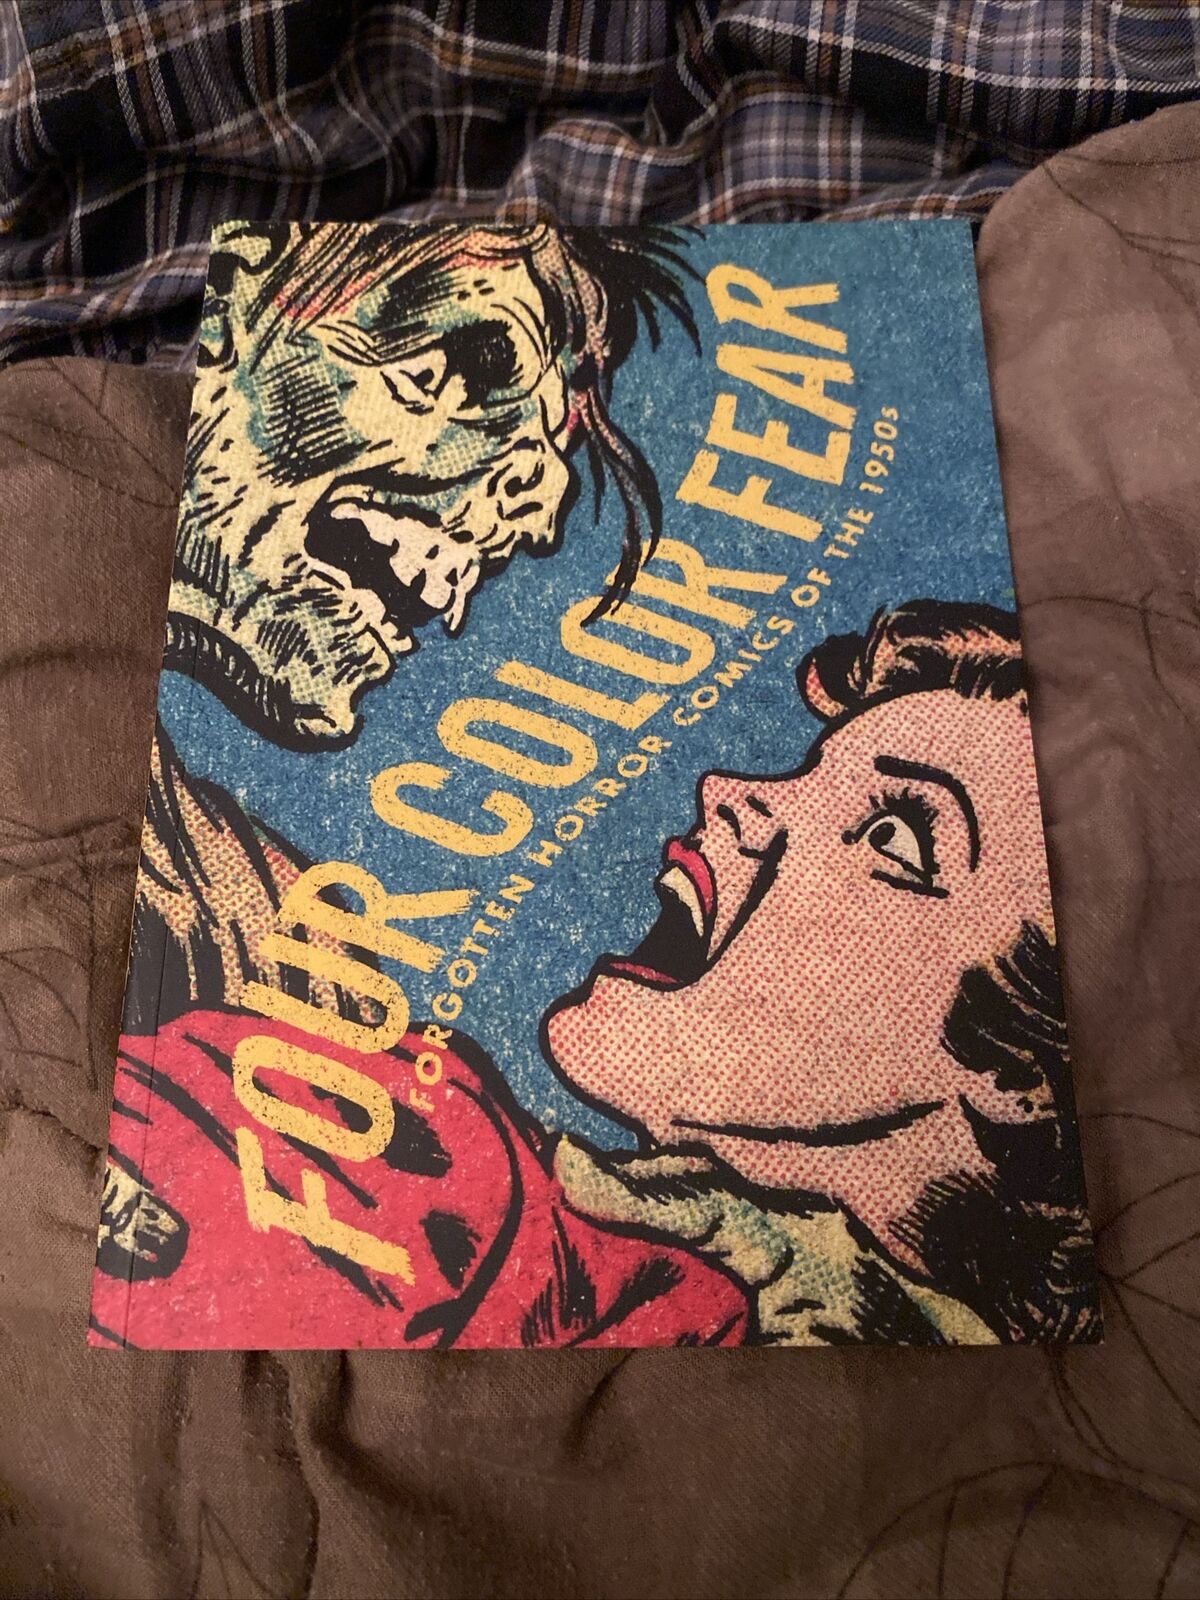 FOUR COLOR FEAR Forgotten Horror Comics of the 1950s Book